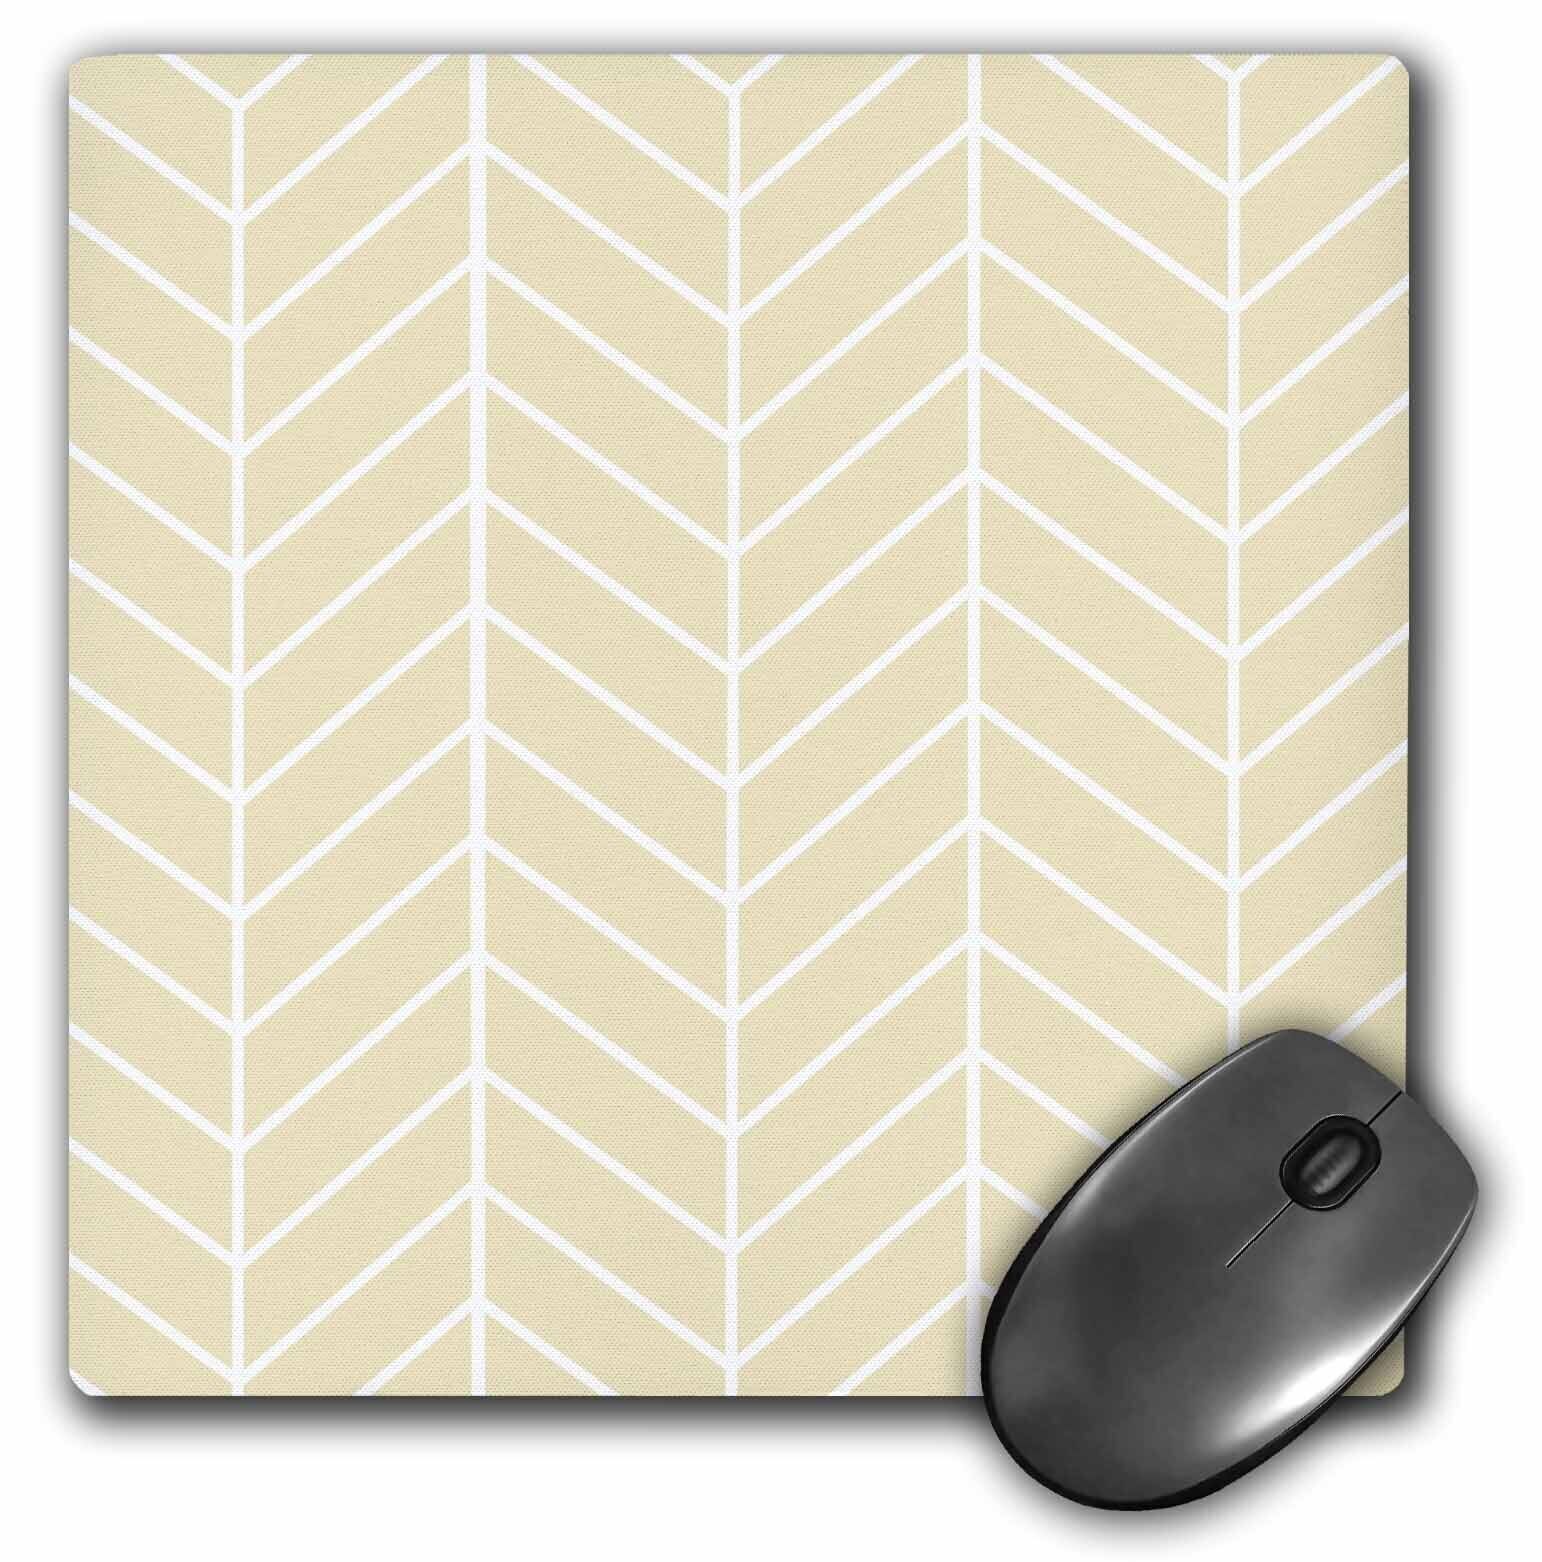 3dRose Beige herringbone pattern - pale gold arrow feather inspired design Mouse